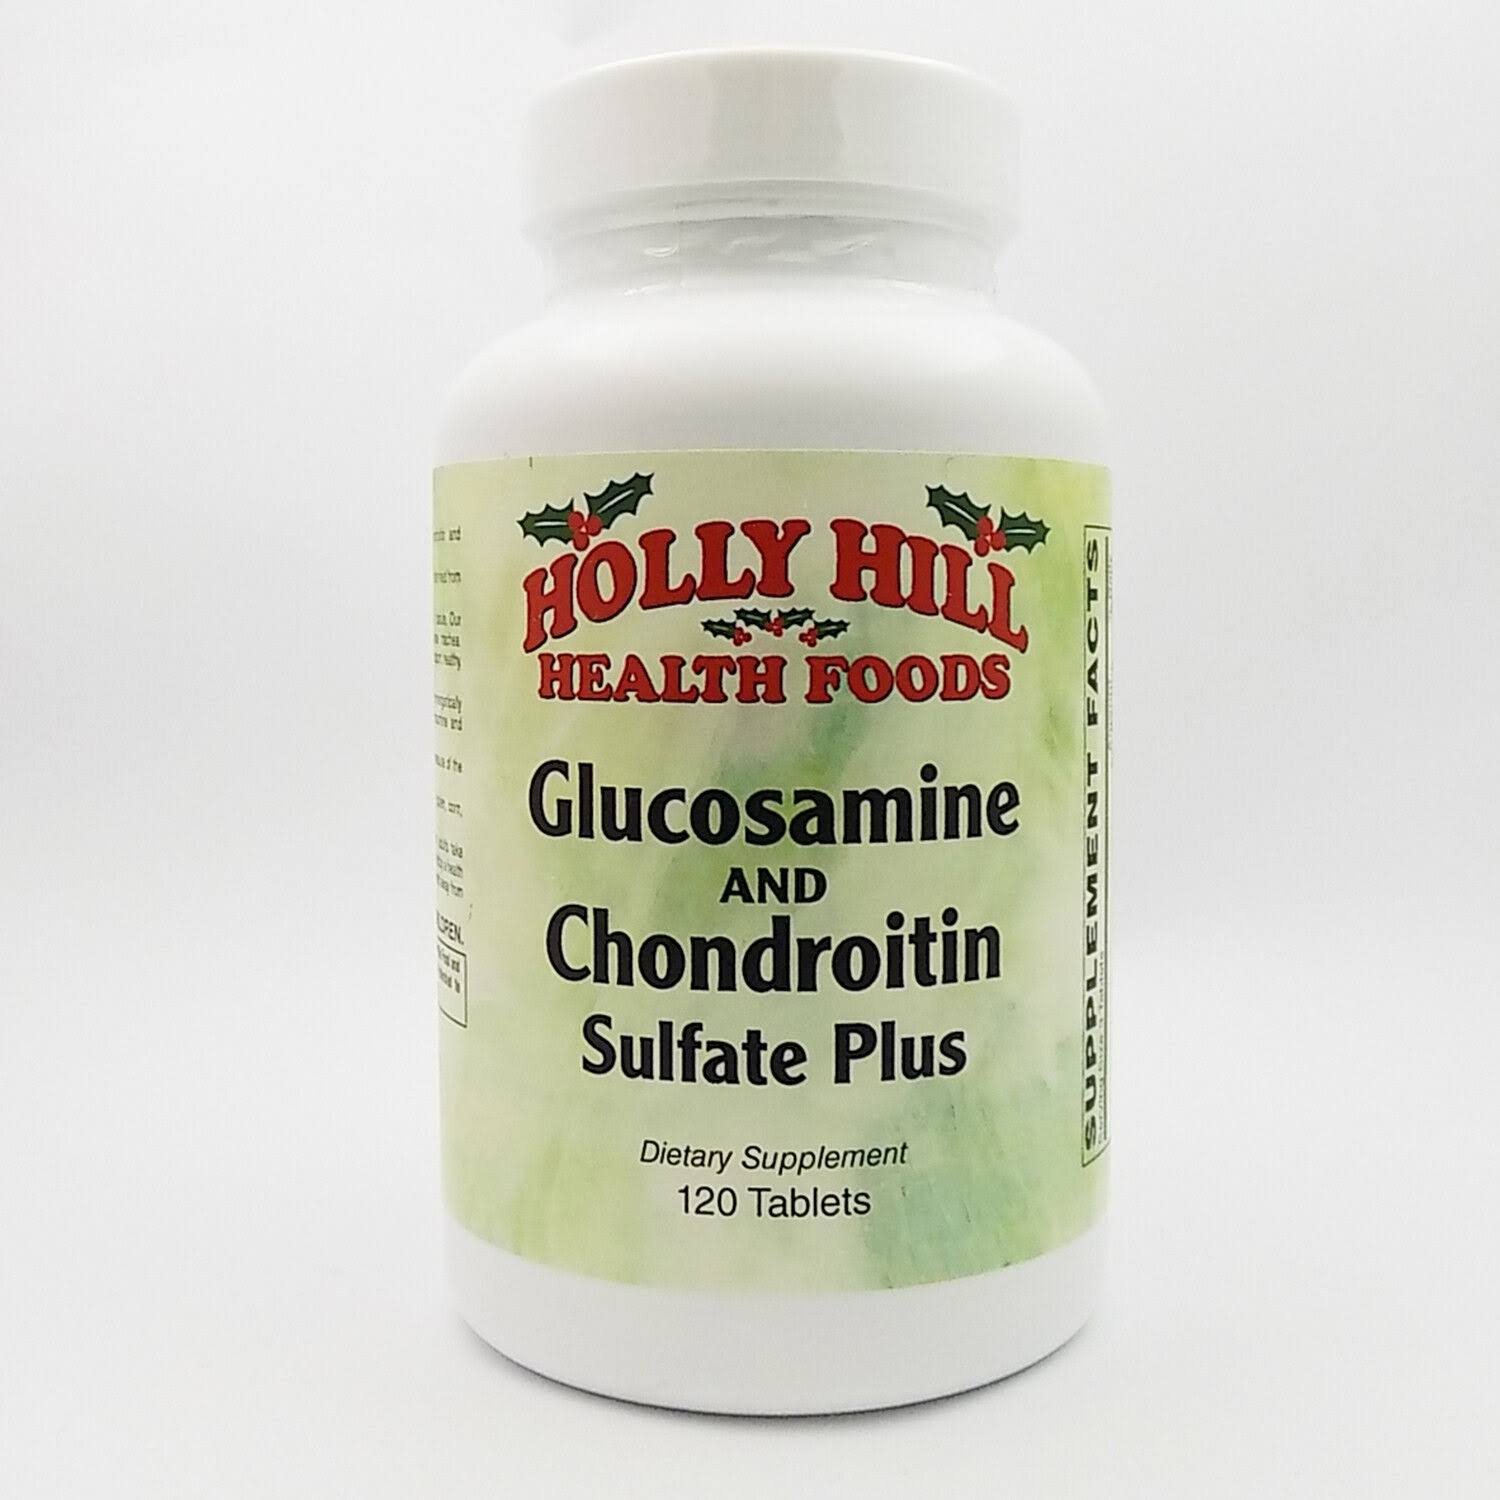 Lowes Foods Glucosamine and Chondroitin, Sulfate Plus, Tablets